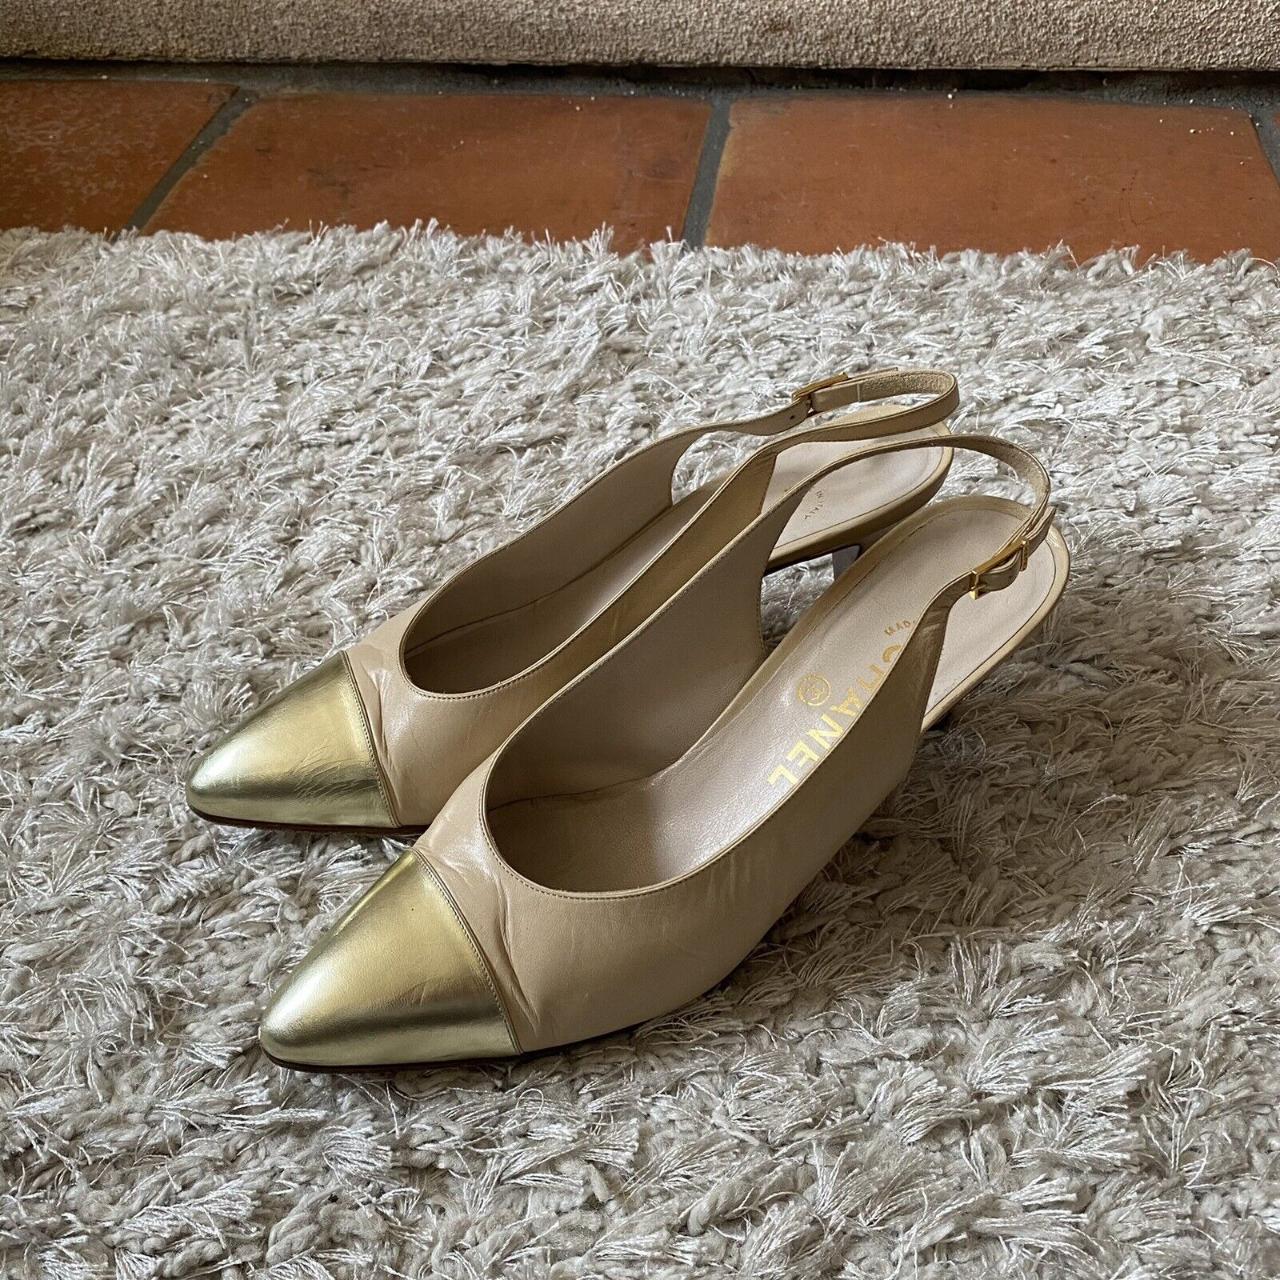 Used] CHANEL lined strap pumps / 35.5 / black / with kakatsure